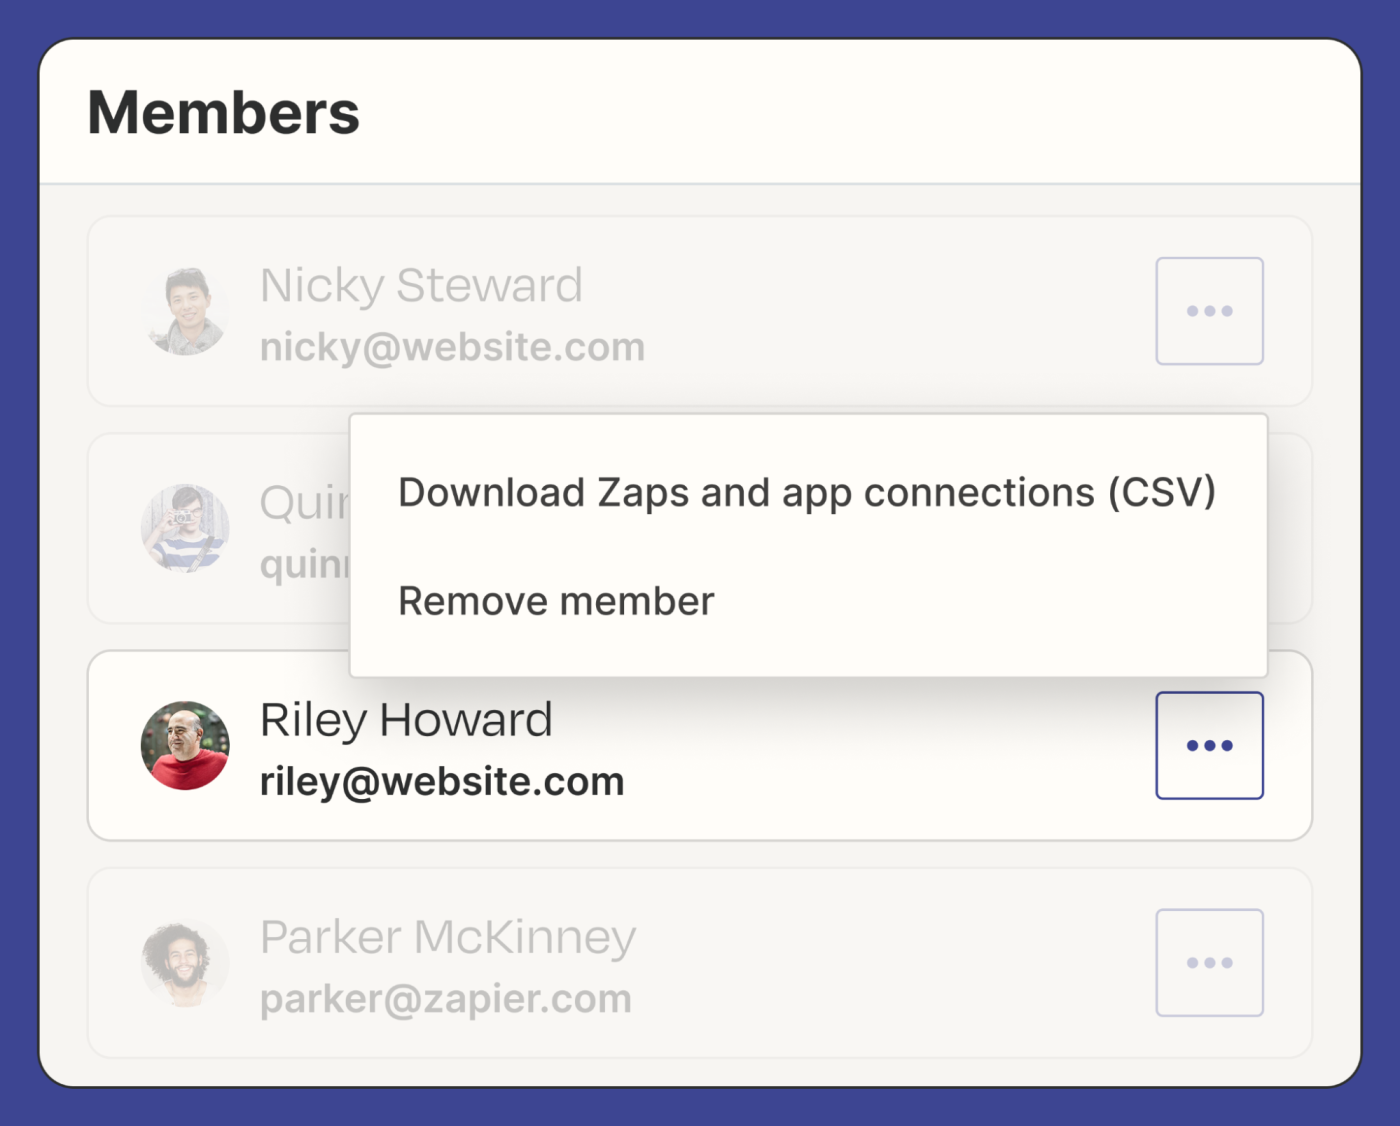 Partial view of members in a Zapier account. One member's profile is selected with a dropdown of actions: download Zaps and app connections (CSV) and remove member.